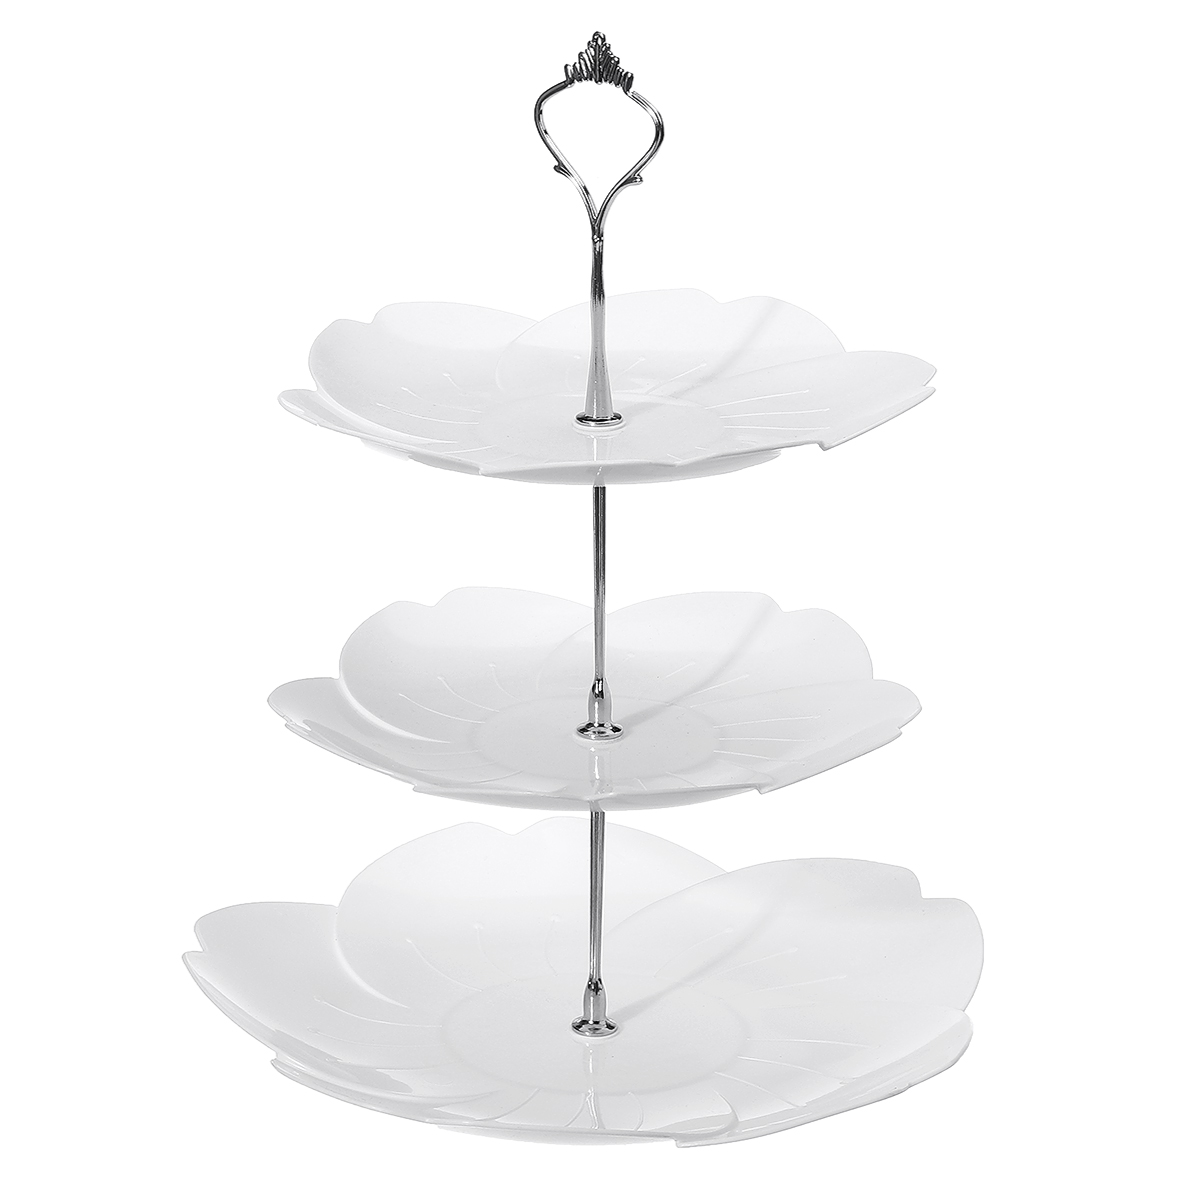 European-style-23-Tier-Fruit-Plate-Dessert-Tray-Cake-Table-Multi-layer-Cake-Stand-Cake-Setting-Table-1926348-9